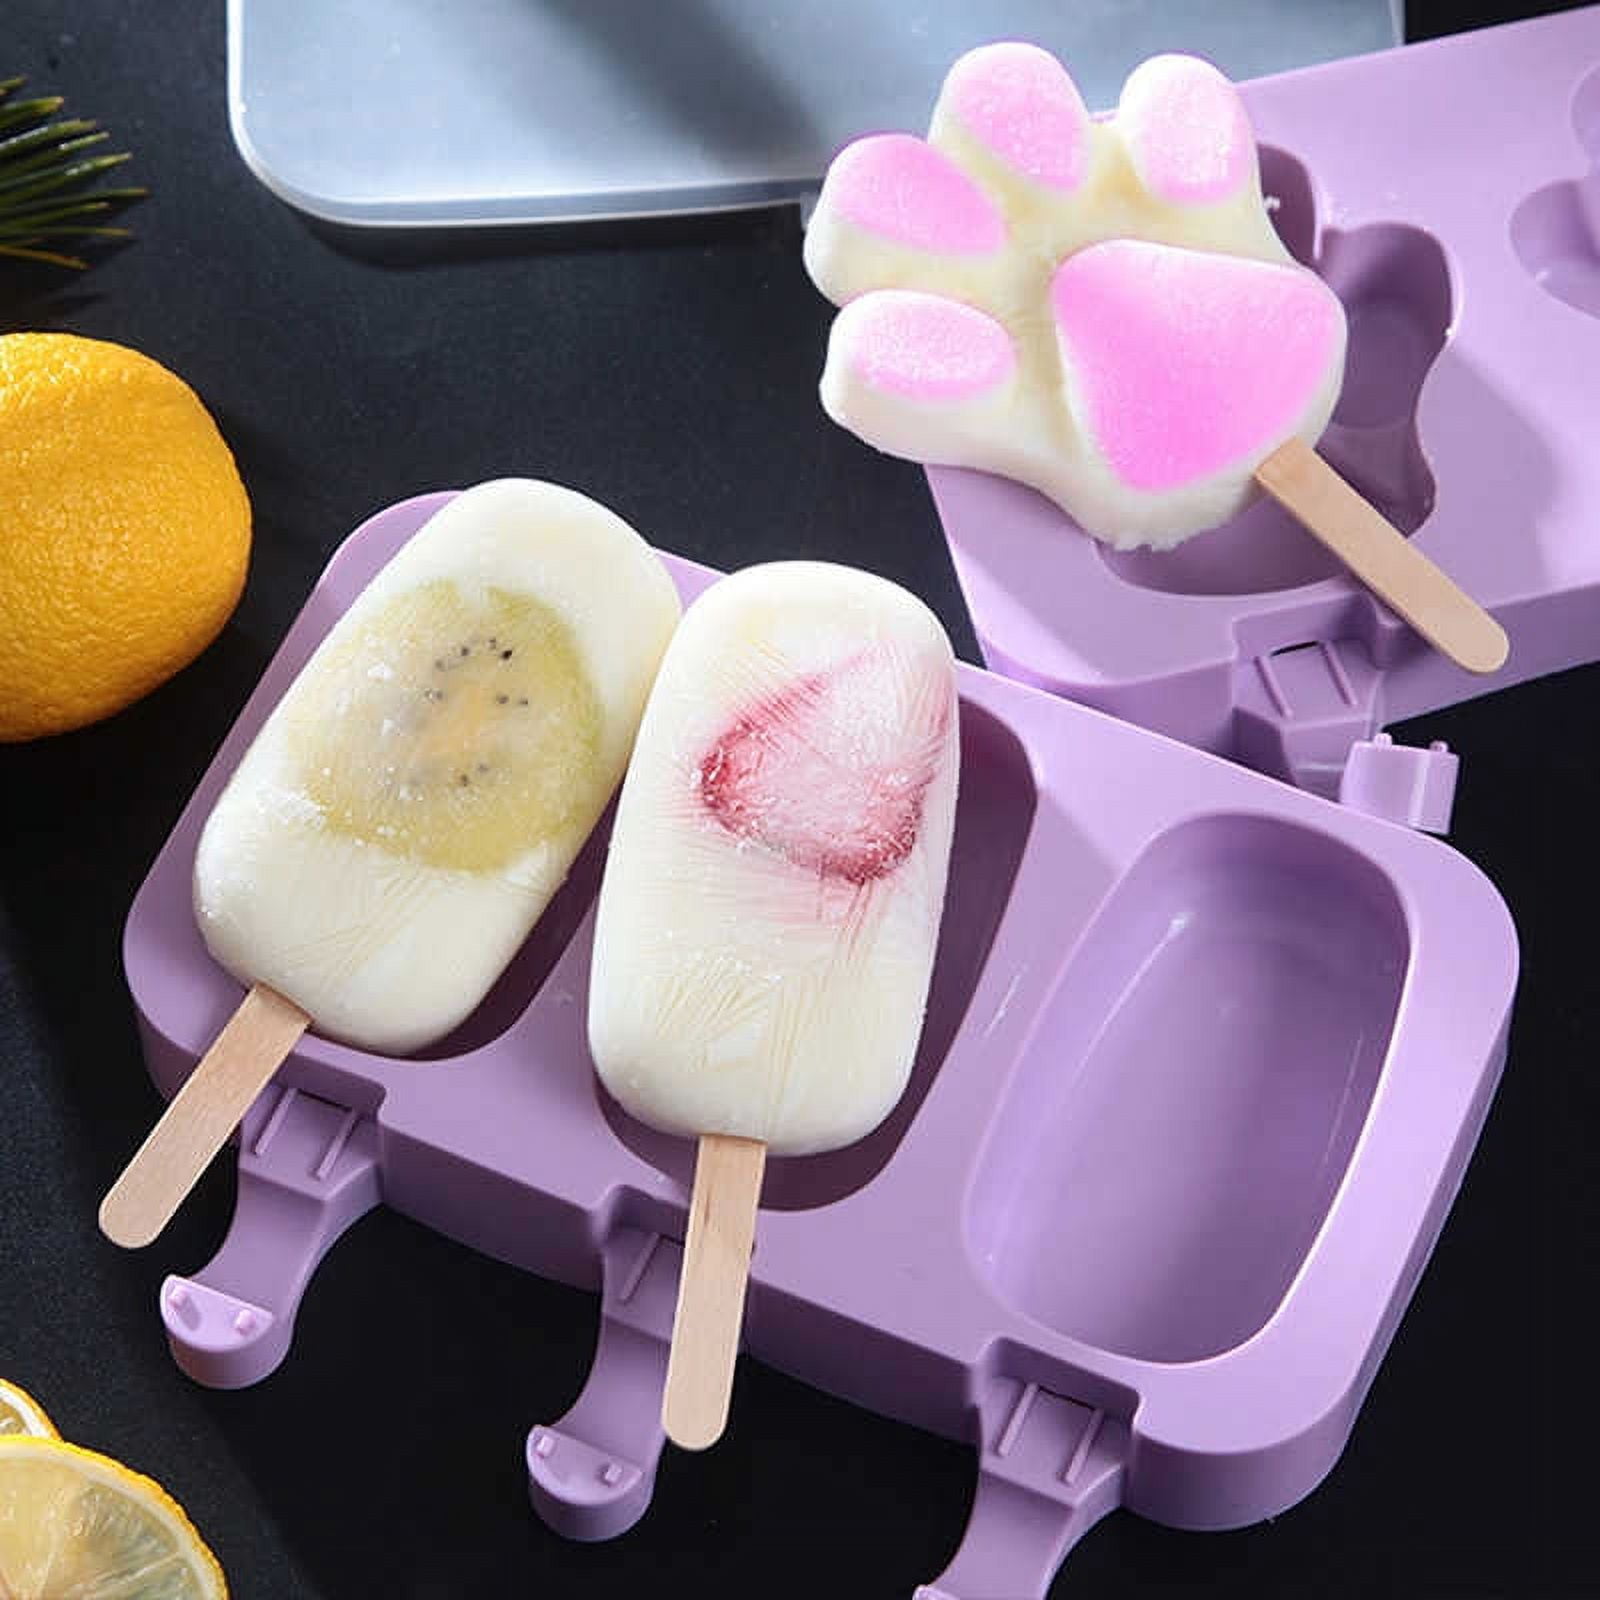 Popsicles Molds, 10 Food Grade Popsicle Maker with 50 Popsicle Sticks & 1  Silicone Funnel, Silicone Popsicle Molds for Kids, Frozen Ice Pop Mold for  Homemade Popsicles 